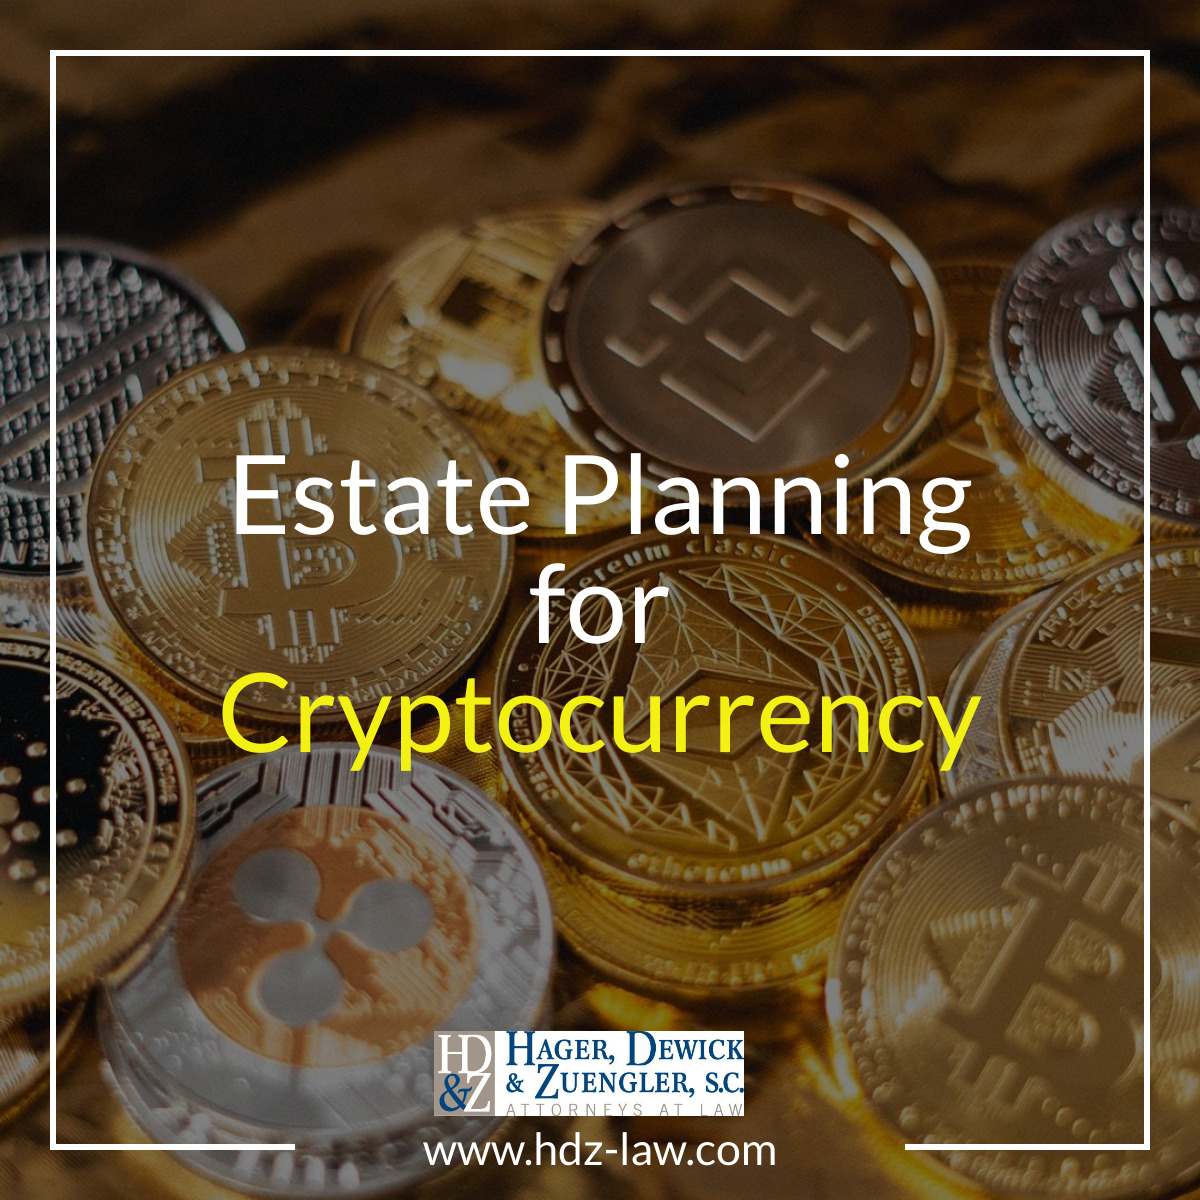 HDZ Estate Planning for Cryptocurrency